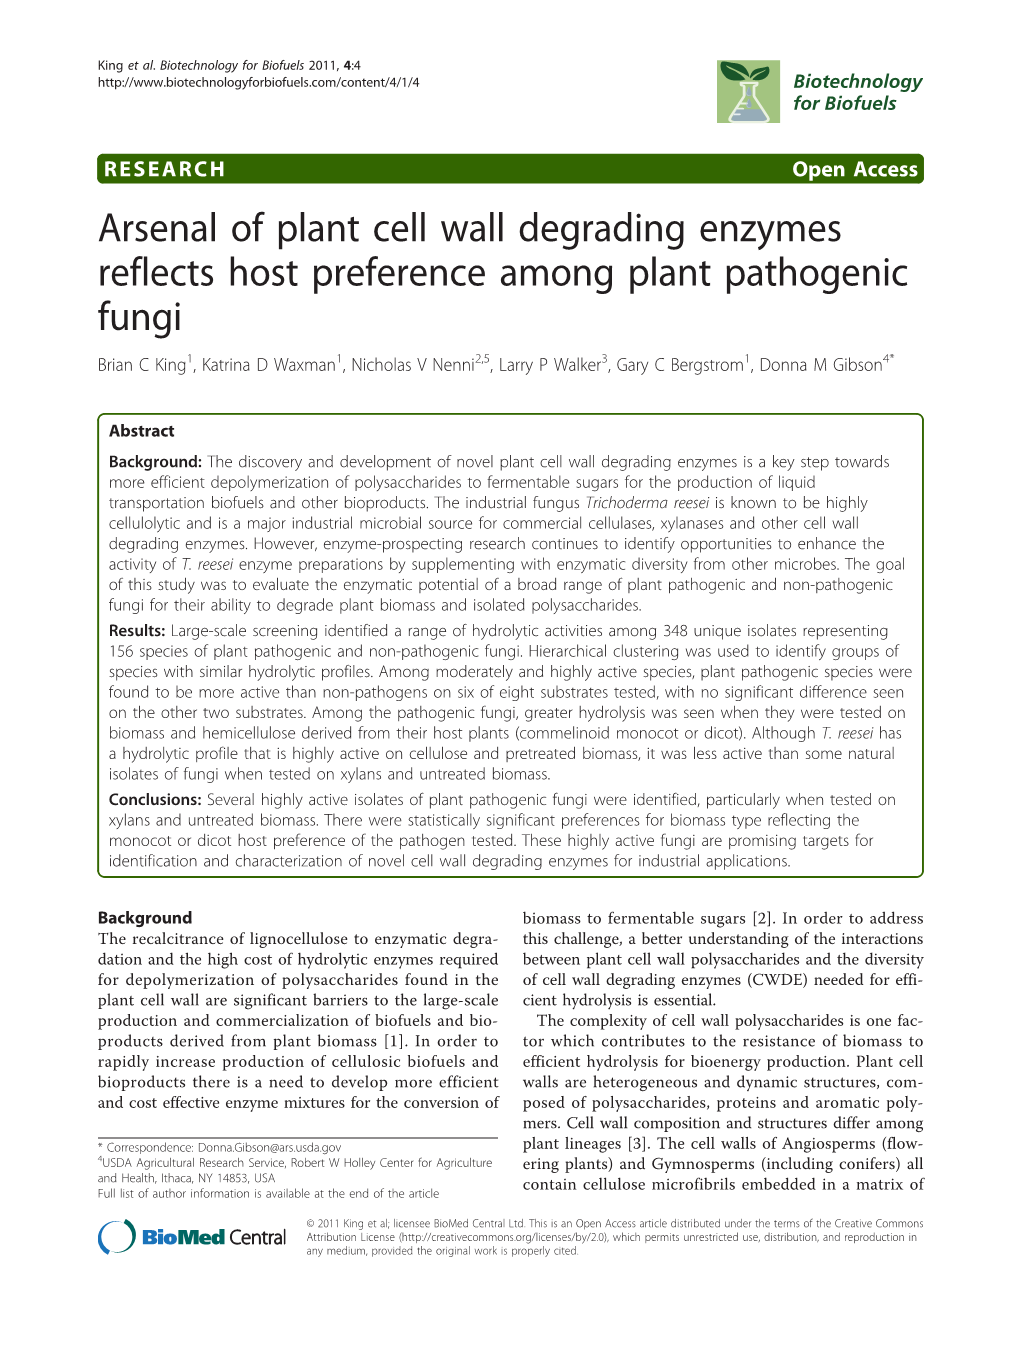 Arsenal of Plant Cell Wall Degrading Enzymes Reflects Host Preference